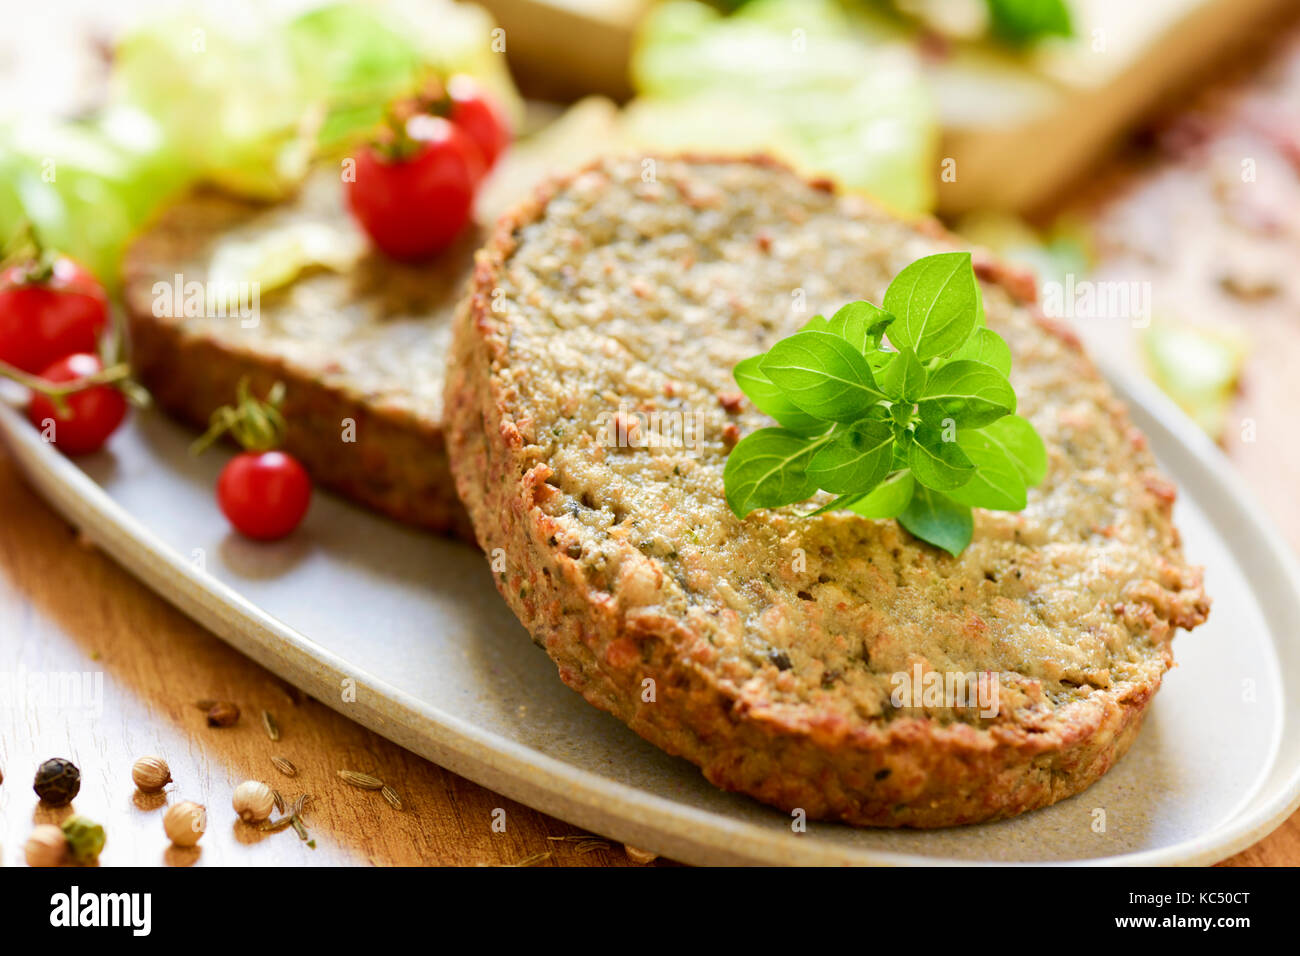 closeup of some veggie burgers made with eggplants and other vegetables in a plate, placed on a rustic wooden table Stock Photo